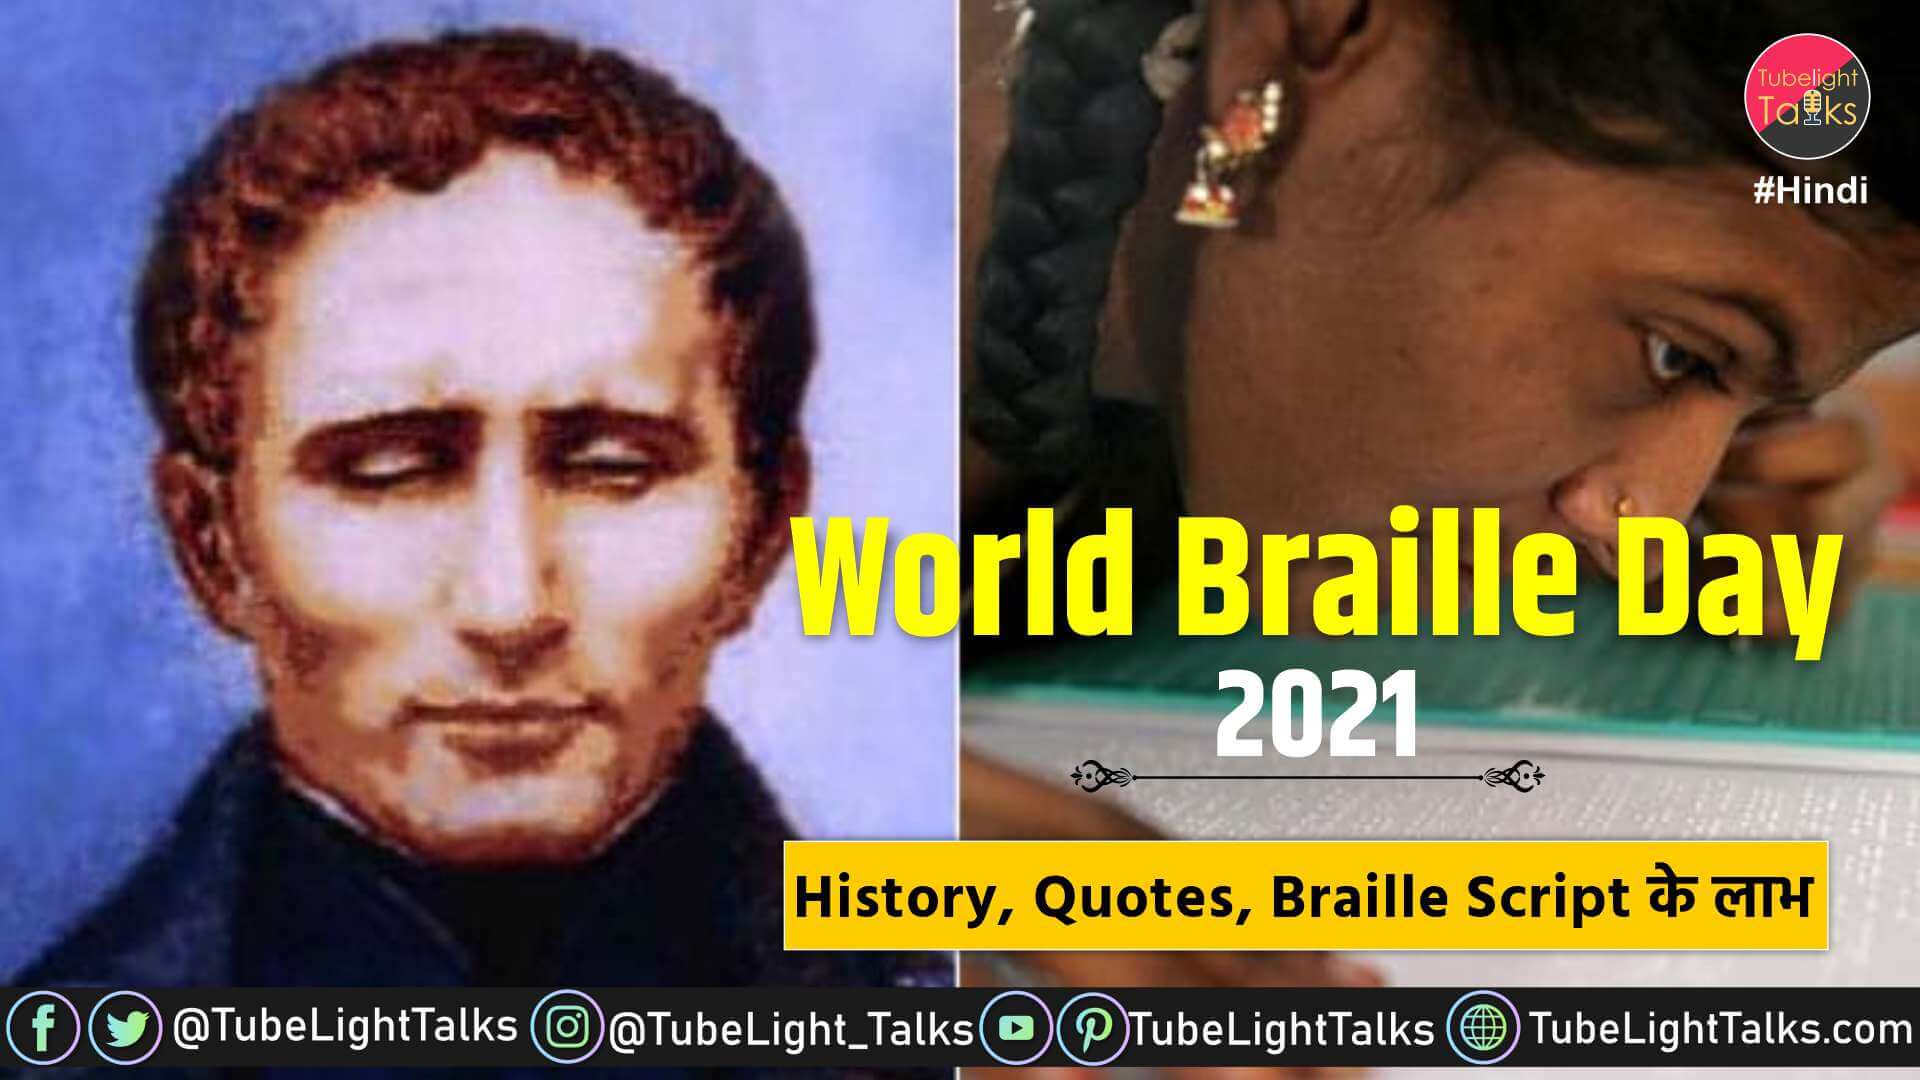 World-Braille-Day-2021-images-poster-quotes-hindi